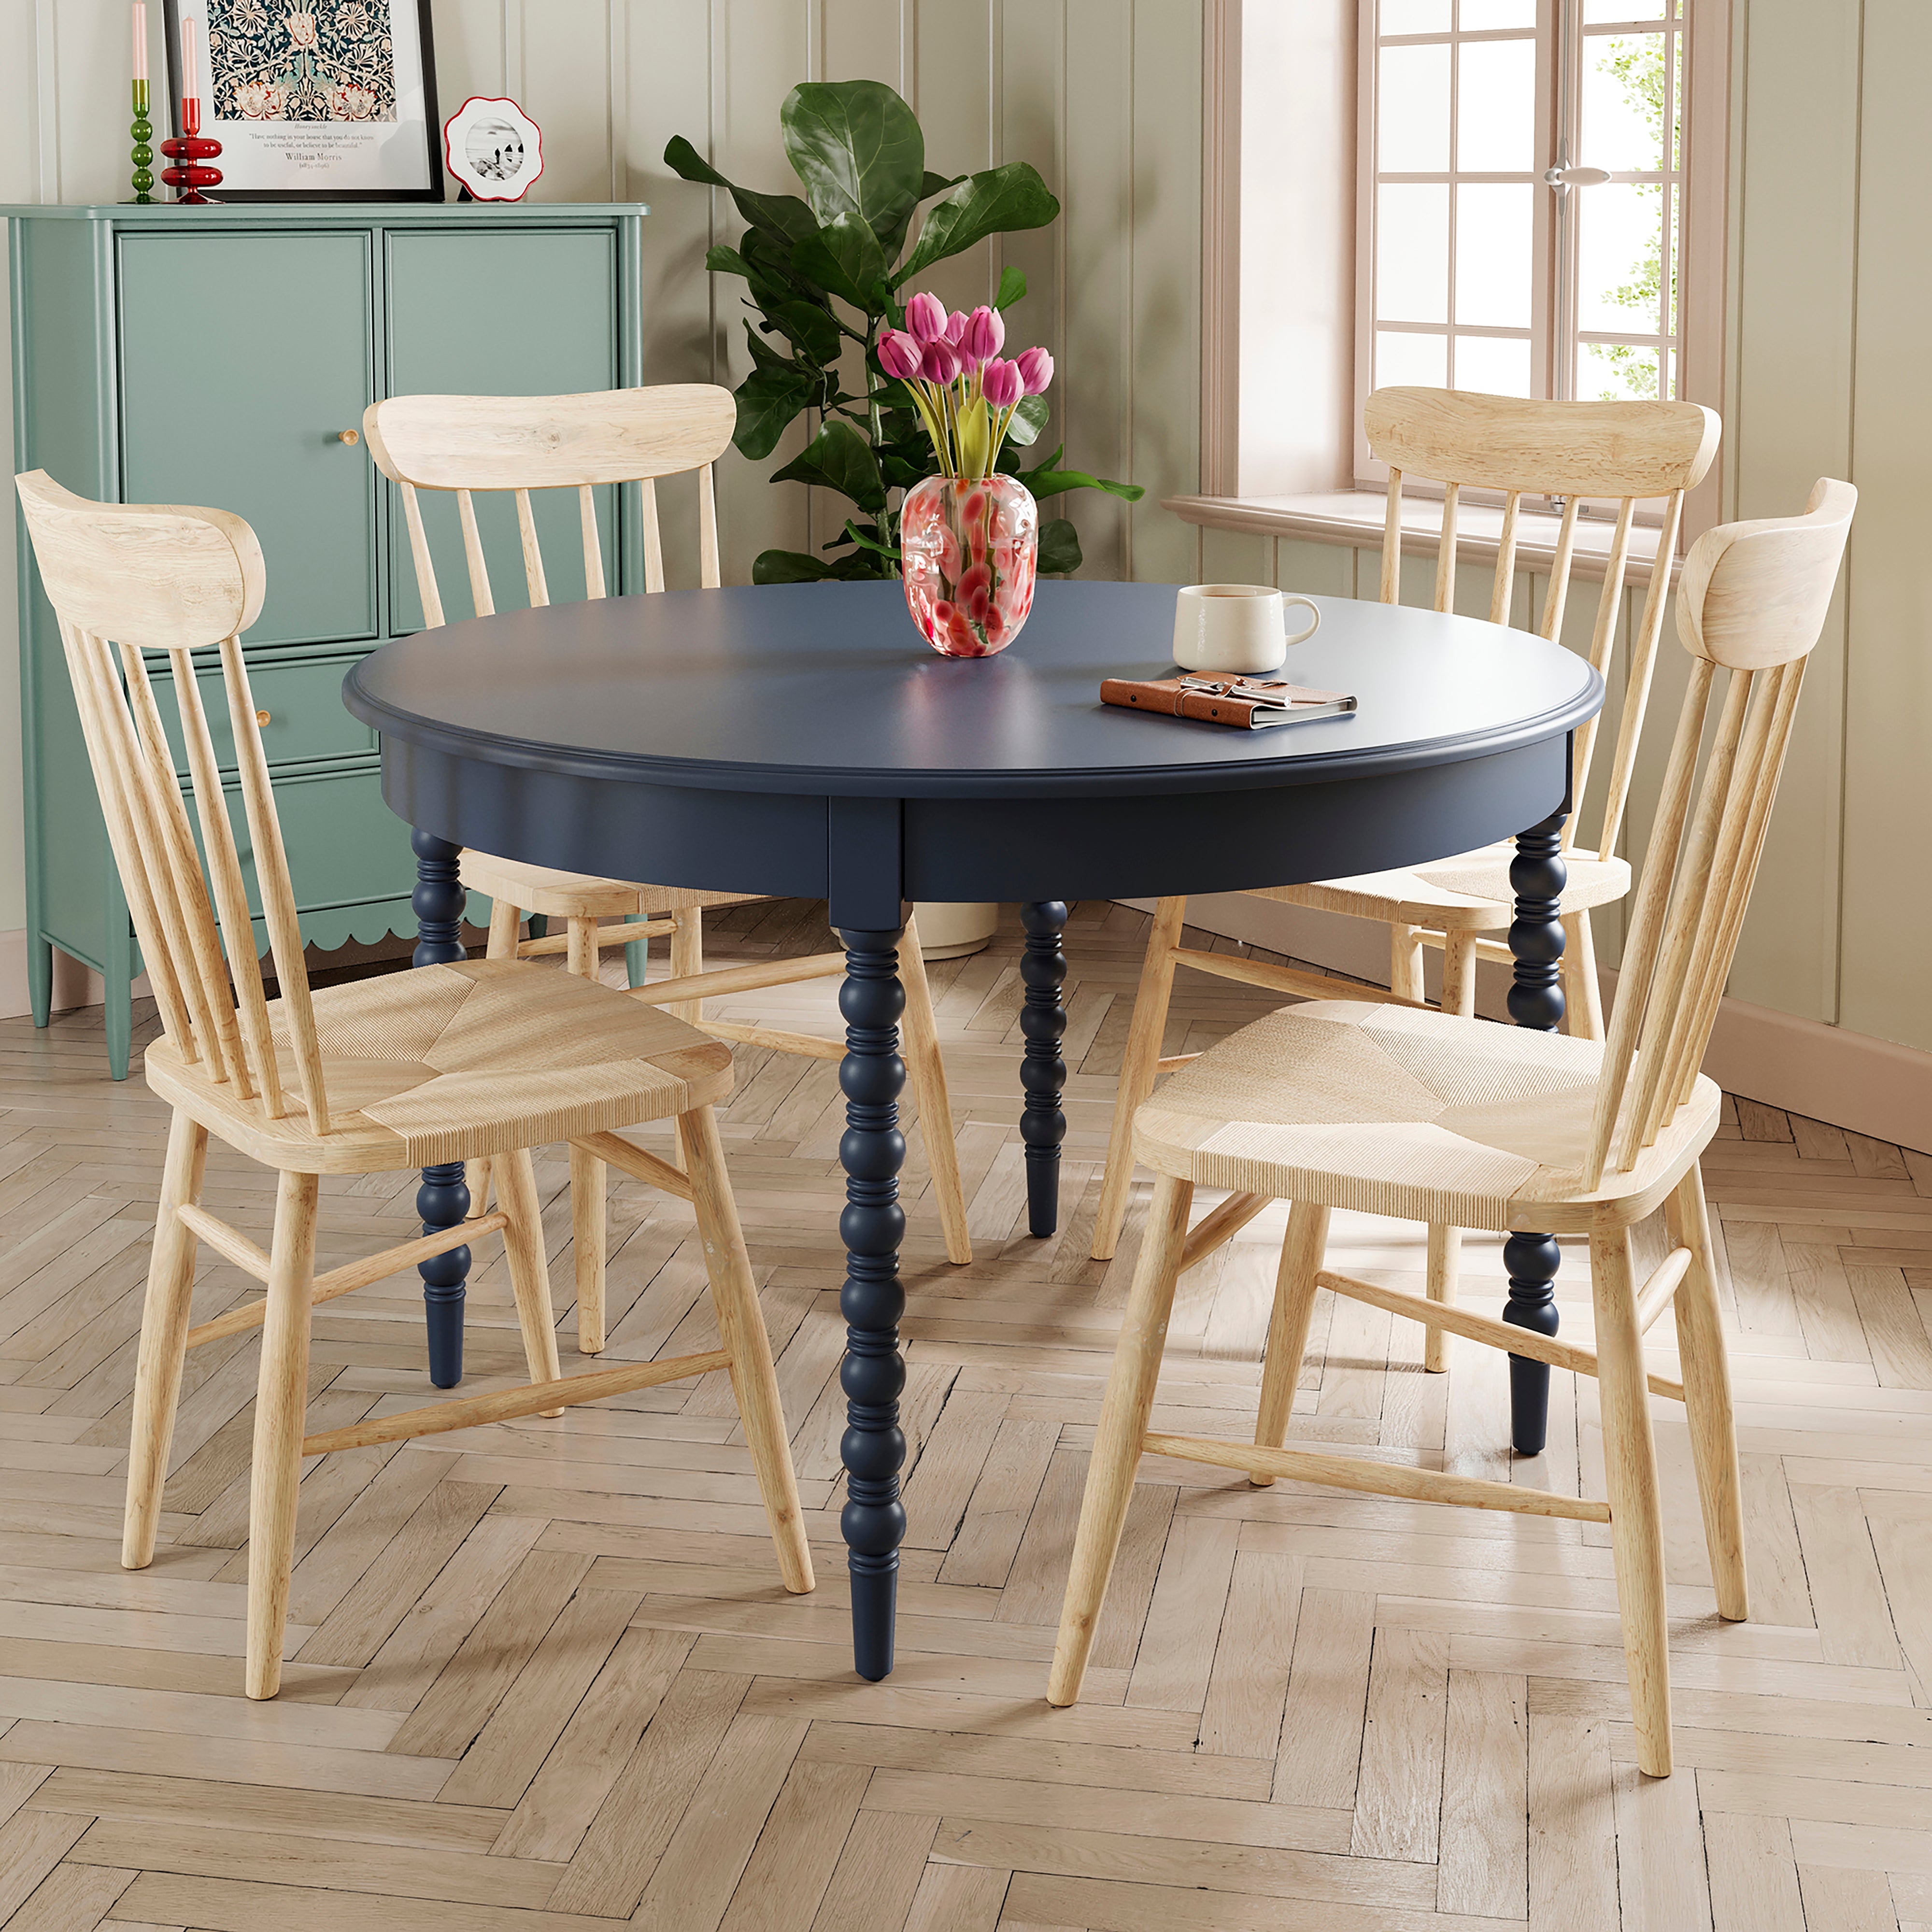 Pippin 4 Seater Round Dining Table Navy Navy